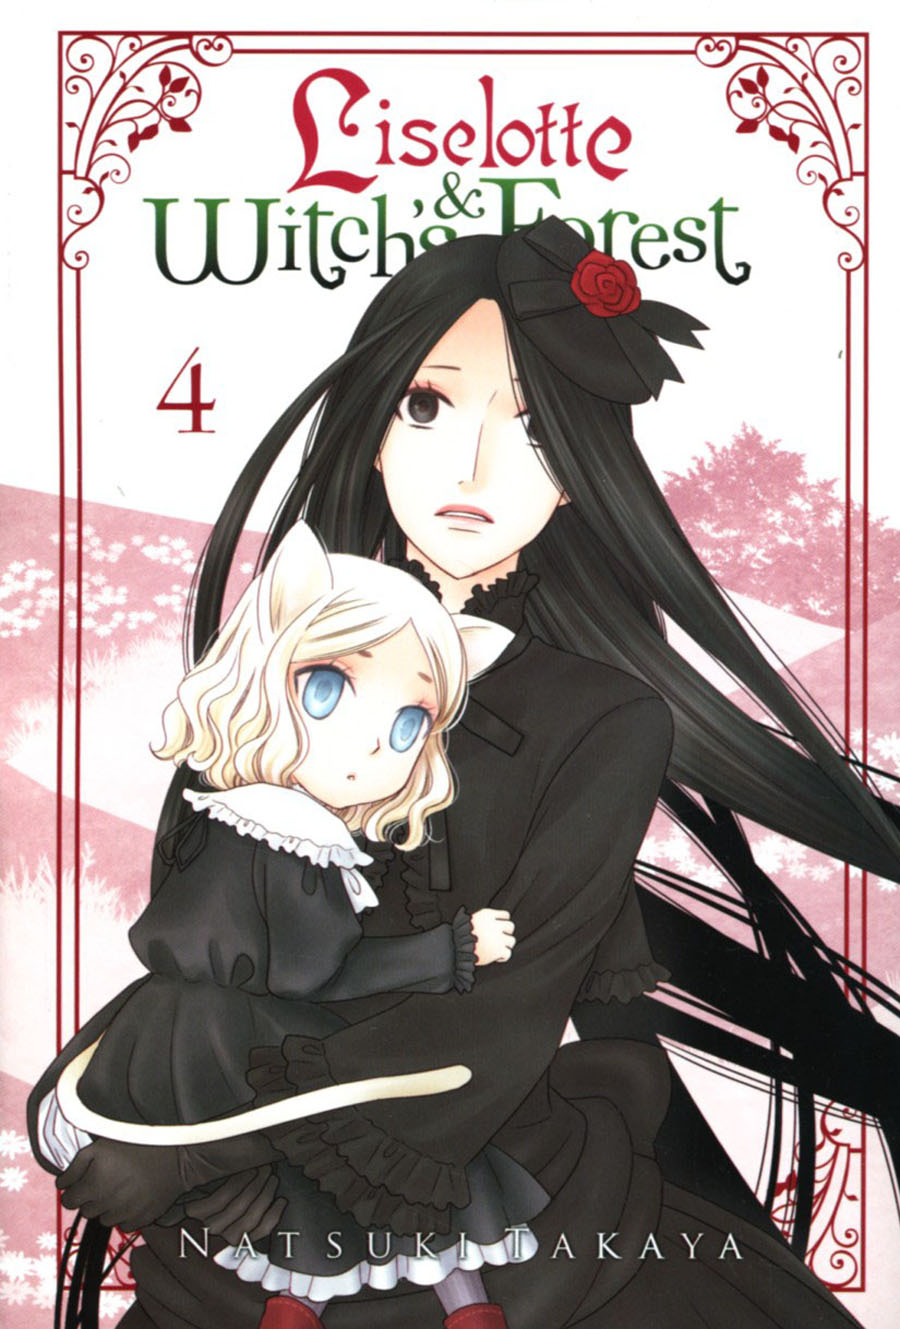 Liselotte & Witchs Forest Vol 4 GN